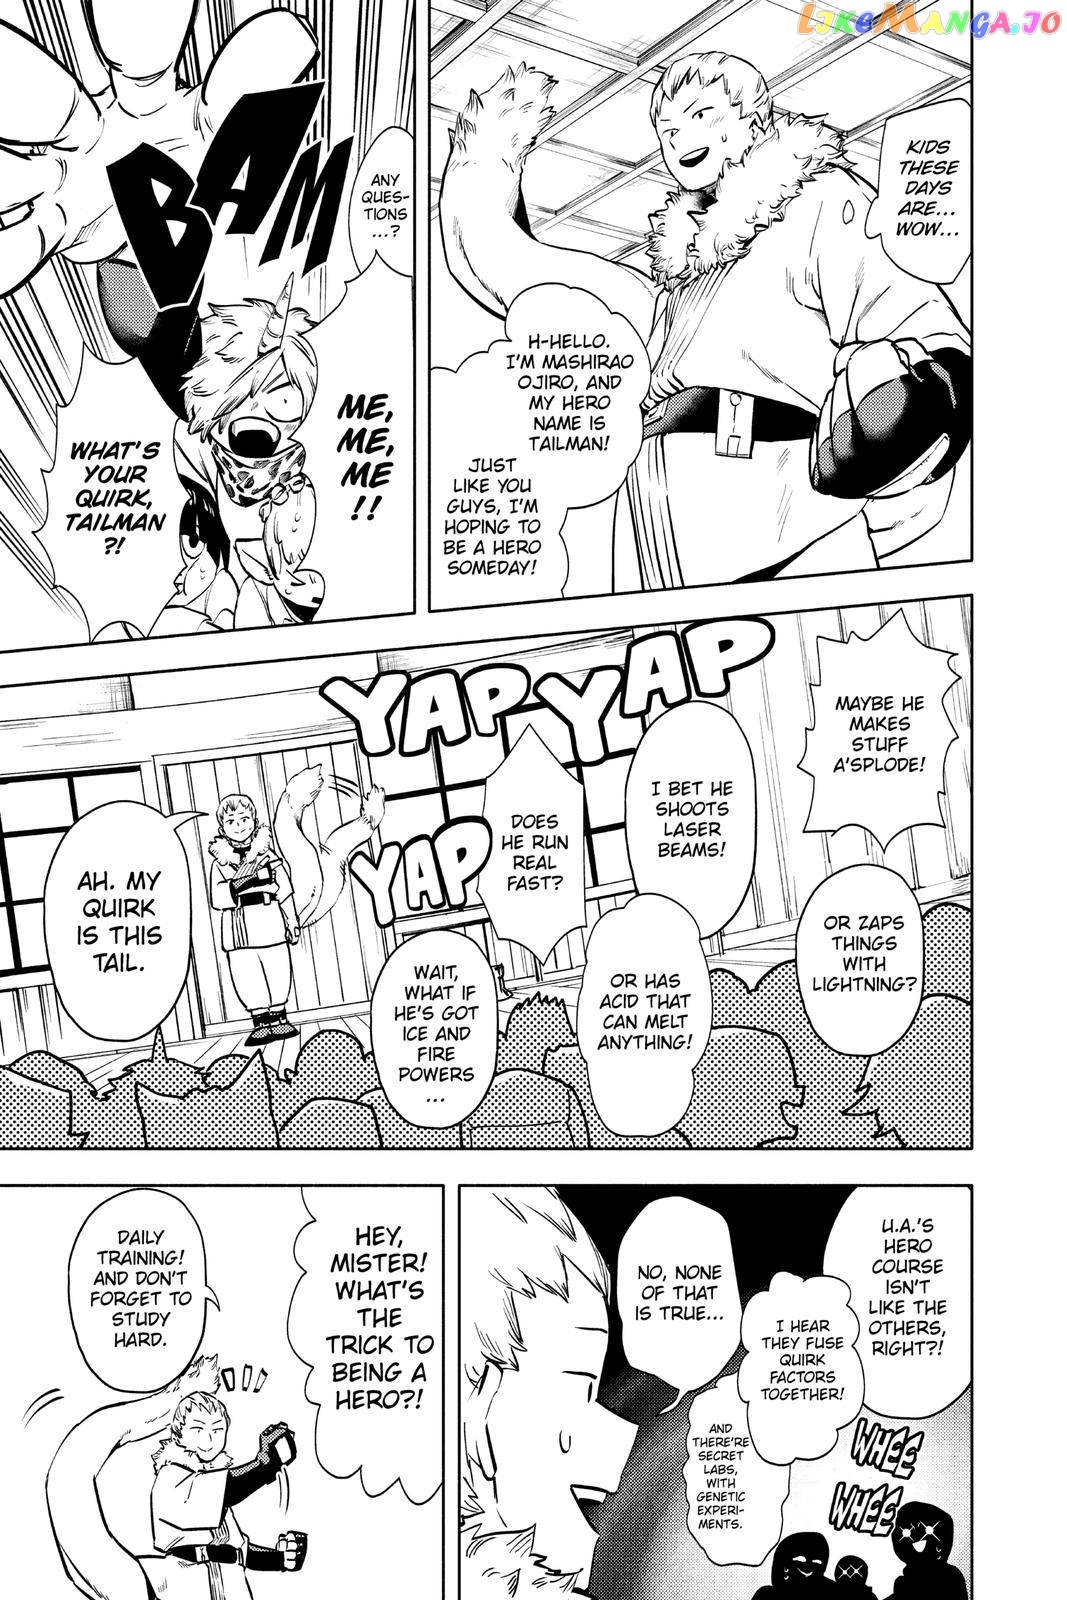 My Hero Academia - Team-Up Missions Chapter 6 - page 7